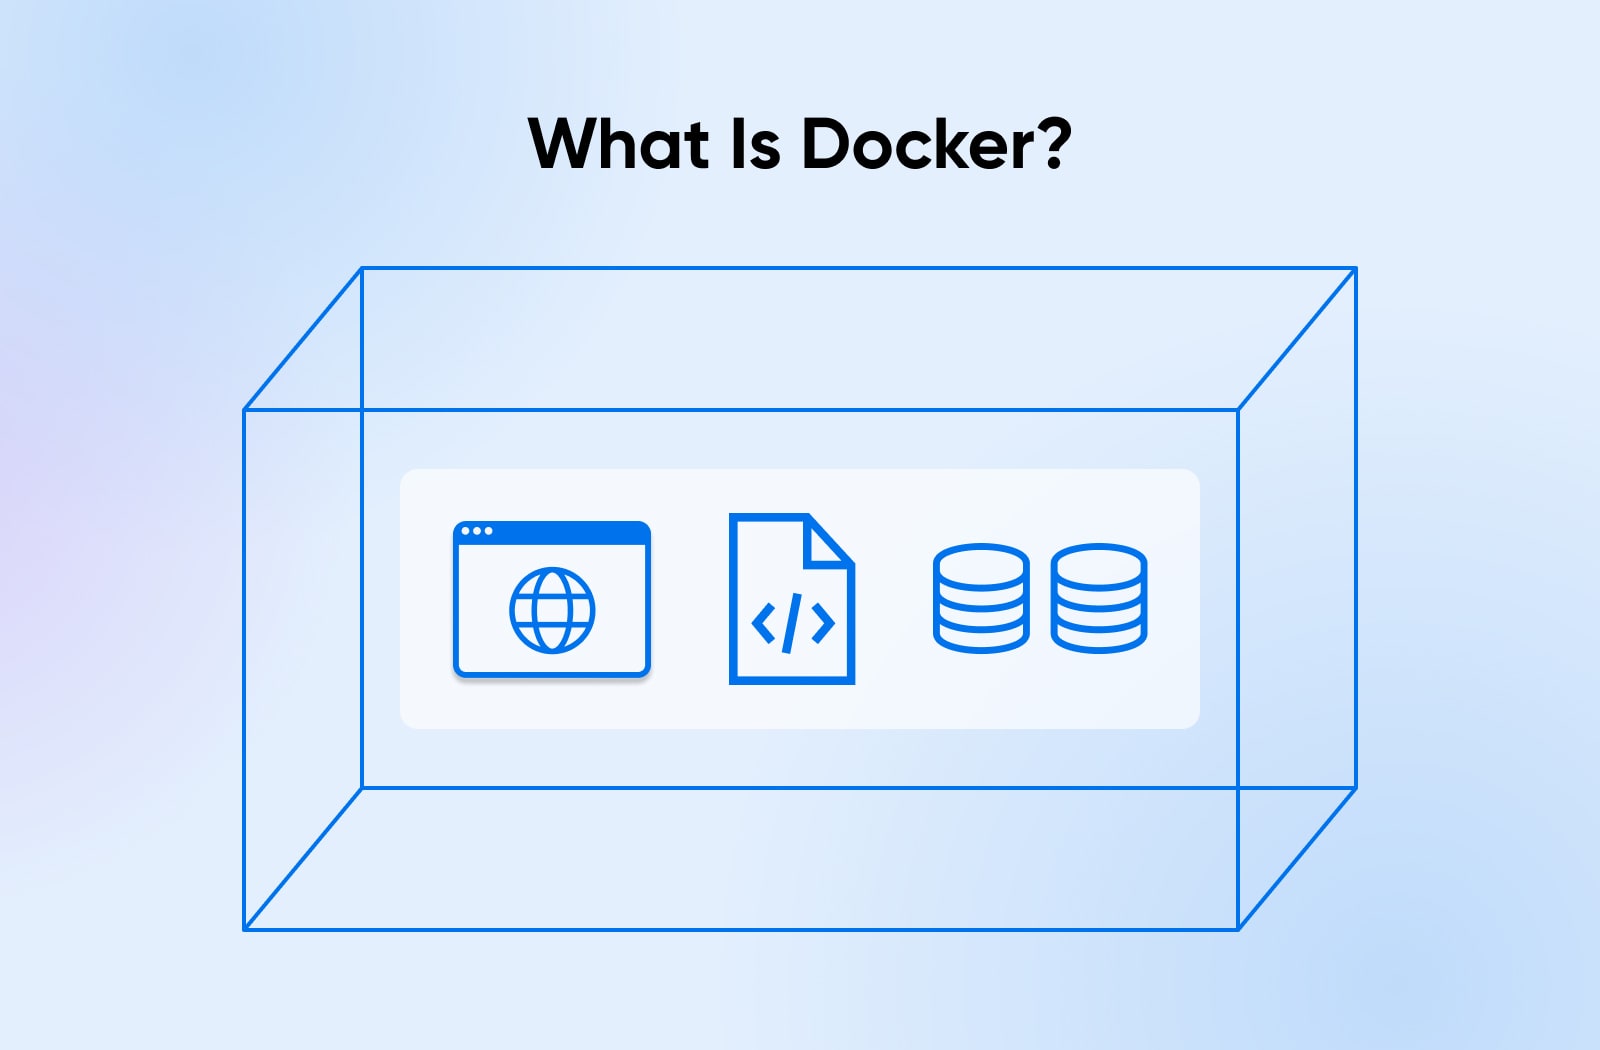 A "What Is Docker?" diagram set on a cool blue gradient background with clean blue lines showing a container.